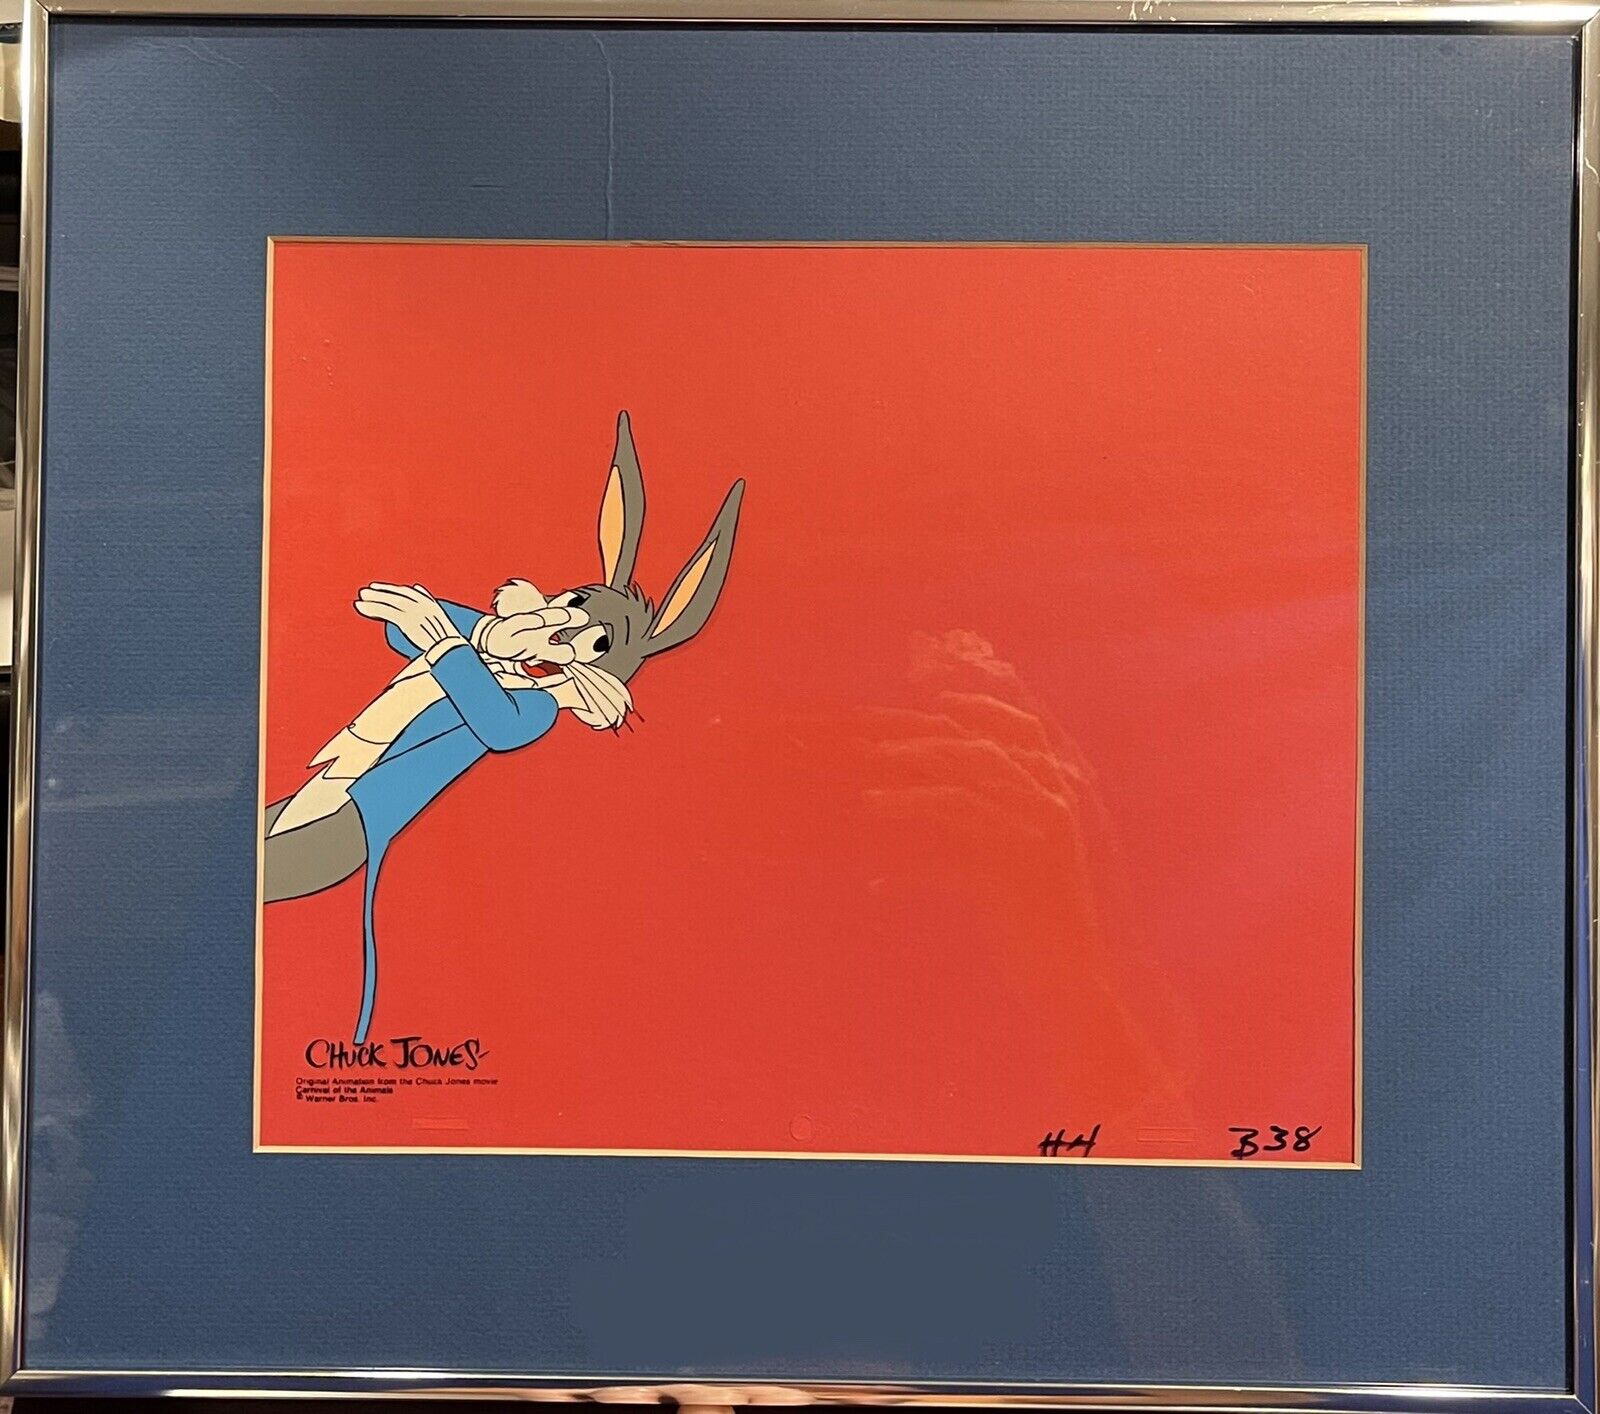 Bugs Bunny Animation Production Cel From Carnival of the Animals-Chuck Jones1976